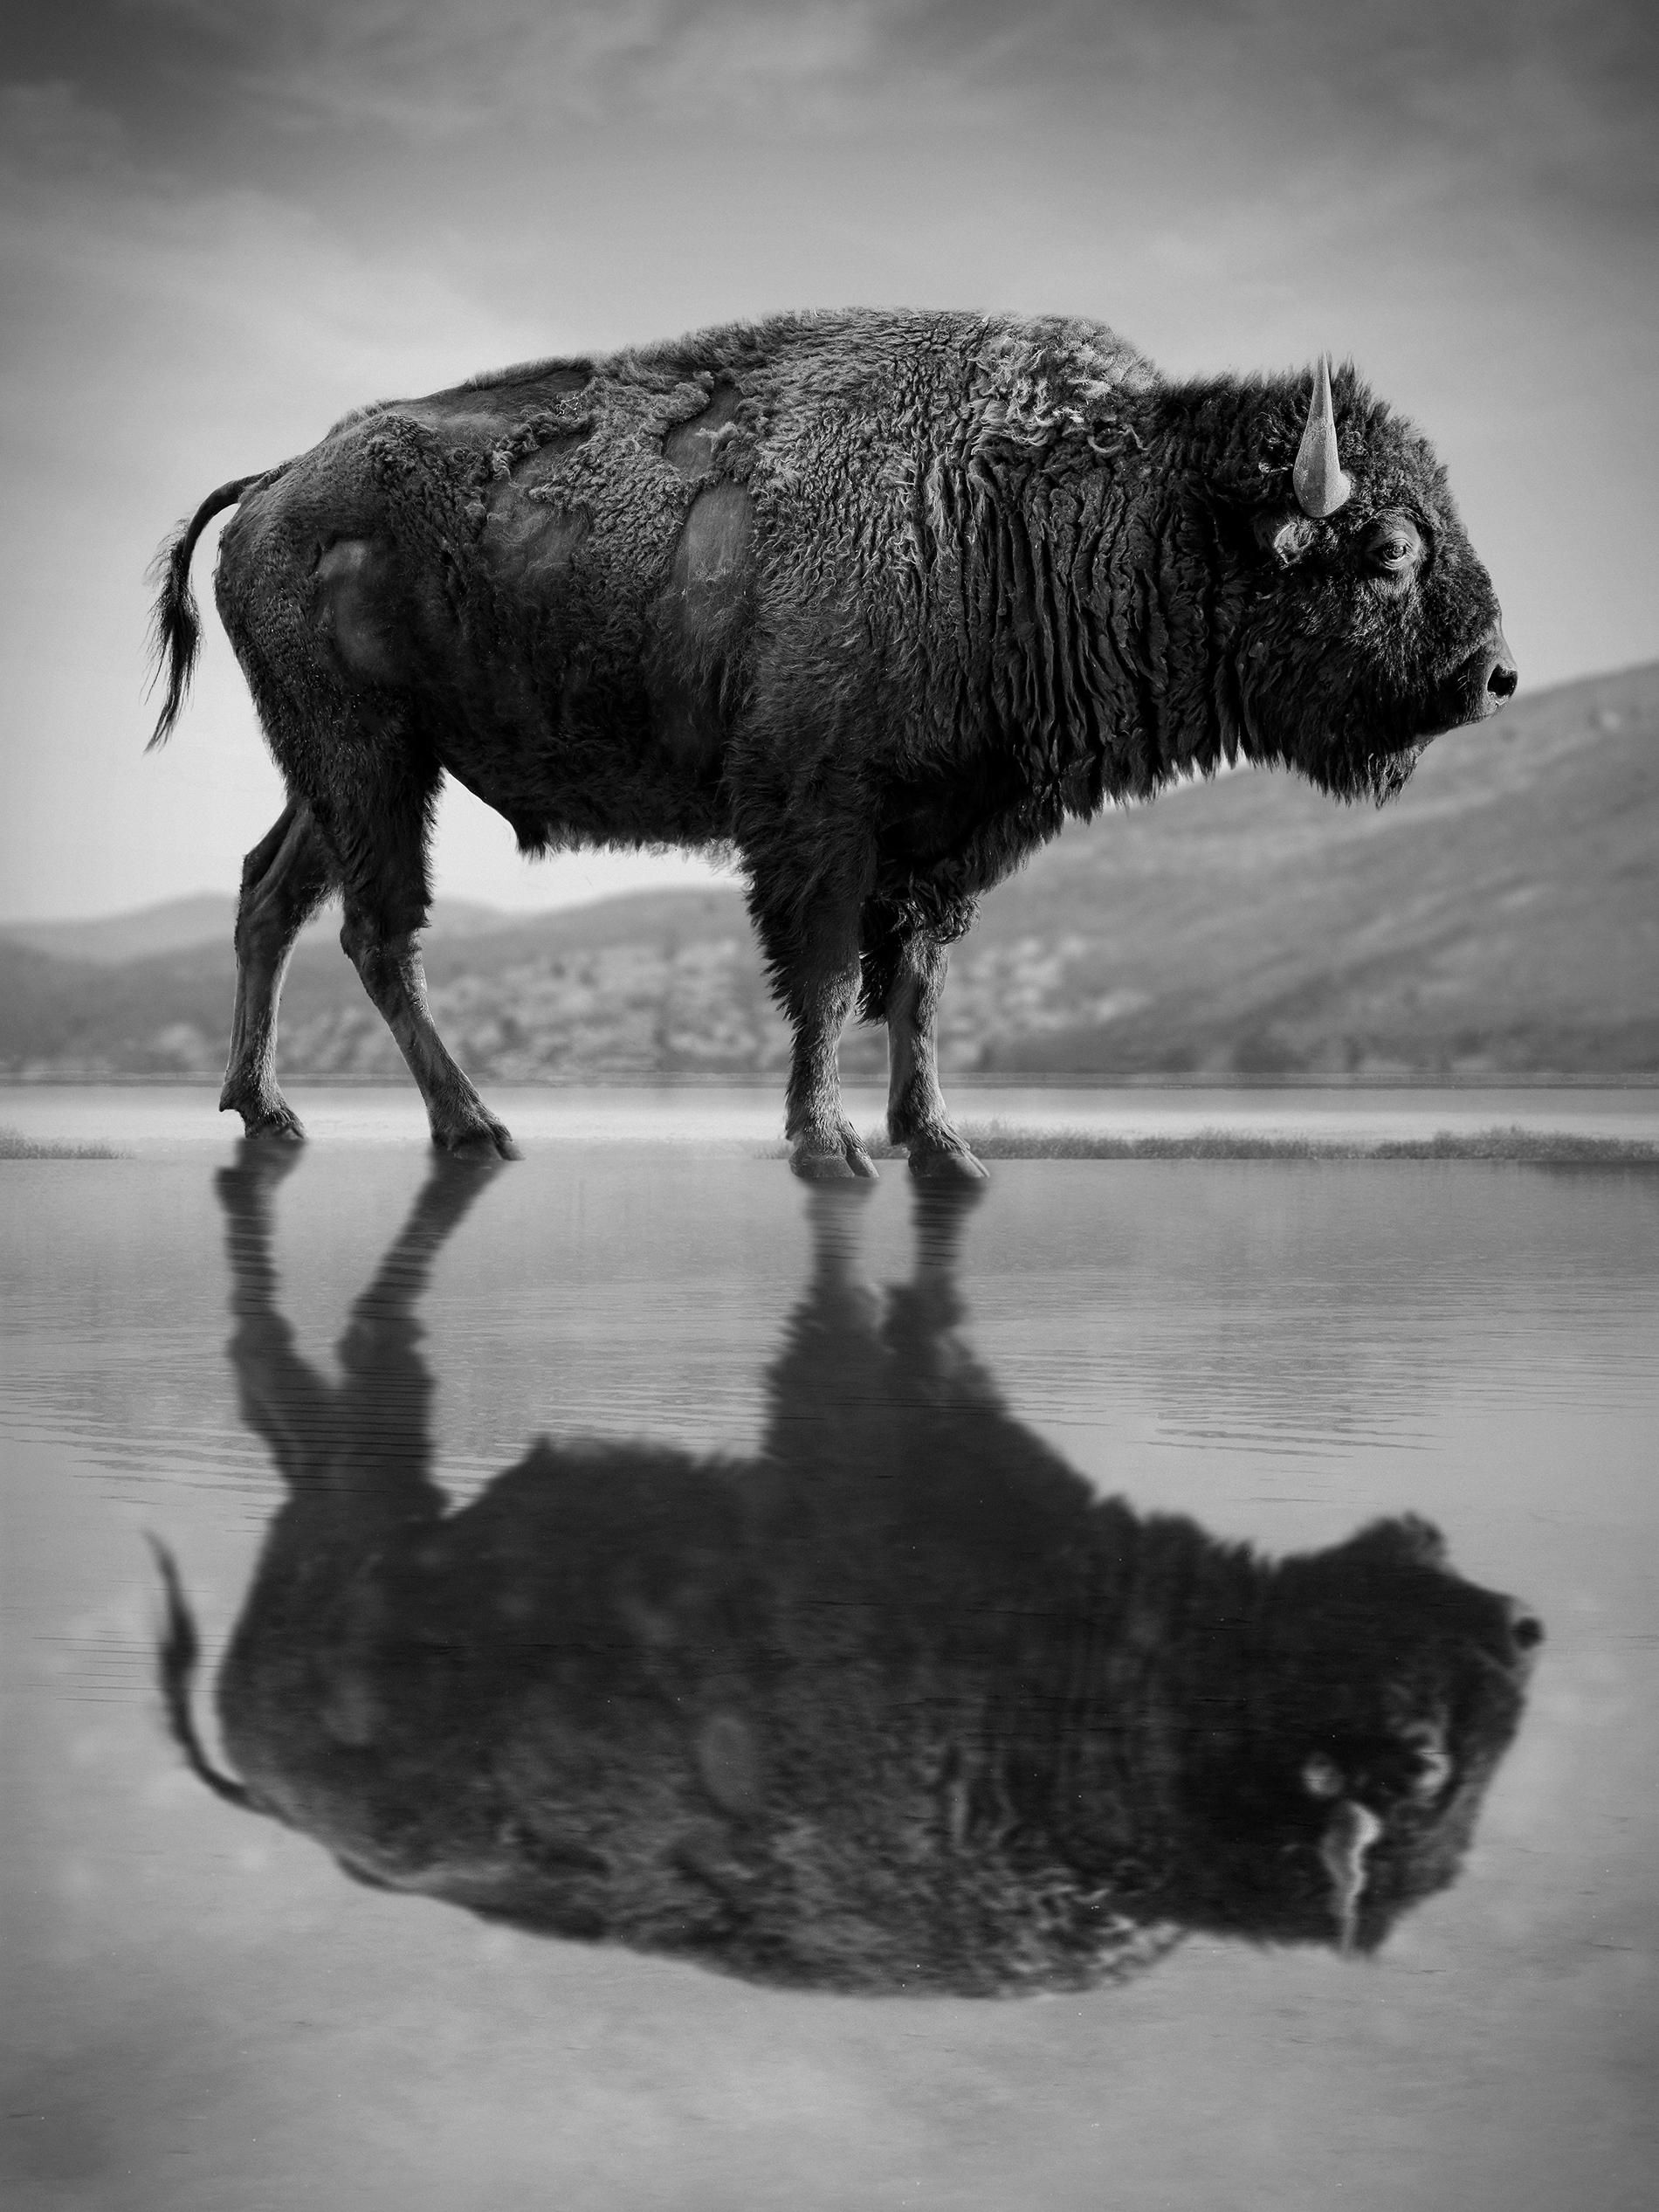 This is a contemporary photograph of an American Bison. 
Printed on archival paper and using archival inks
Framing available. Inquire for rates. 


Shane Russeck has built a reputation for capturing America's landscapes, cultures and endangered